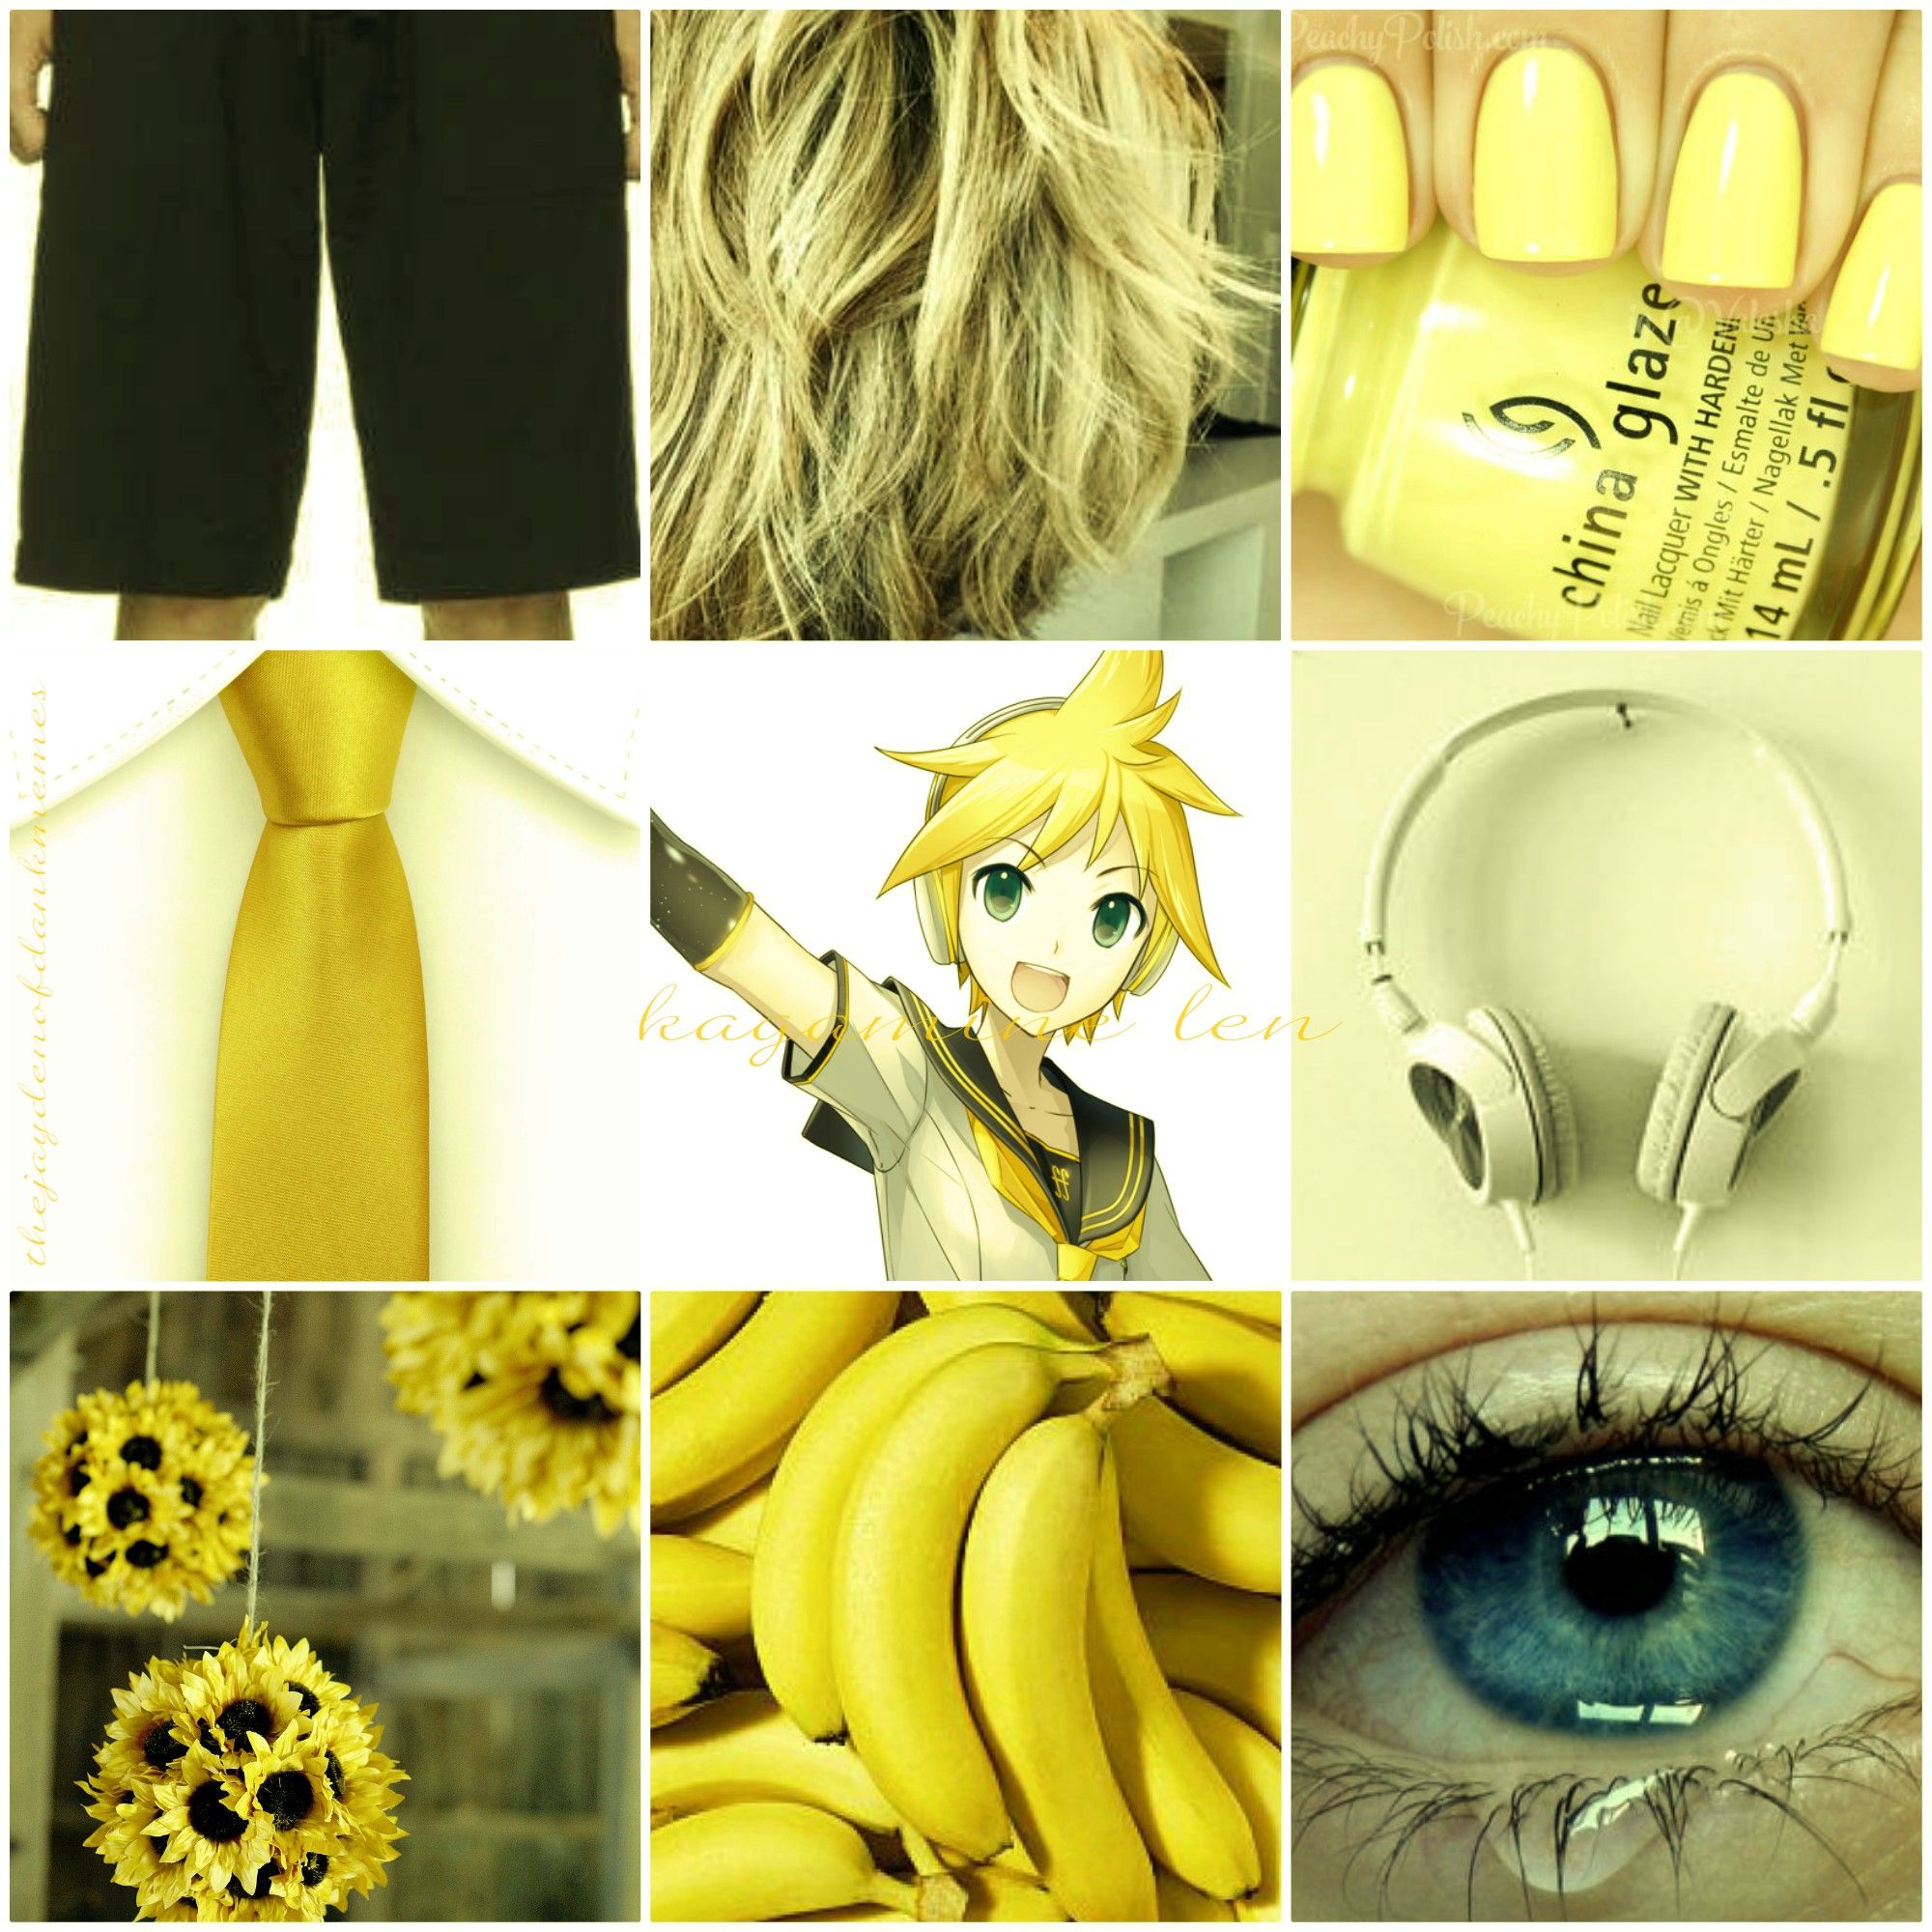 A collage of yellow images including bananas, a tie, a yellow nail polish bottle, a pair of headphones, and an eye with yellow pupils. - 